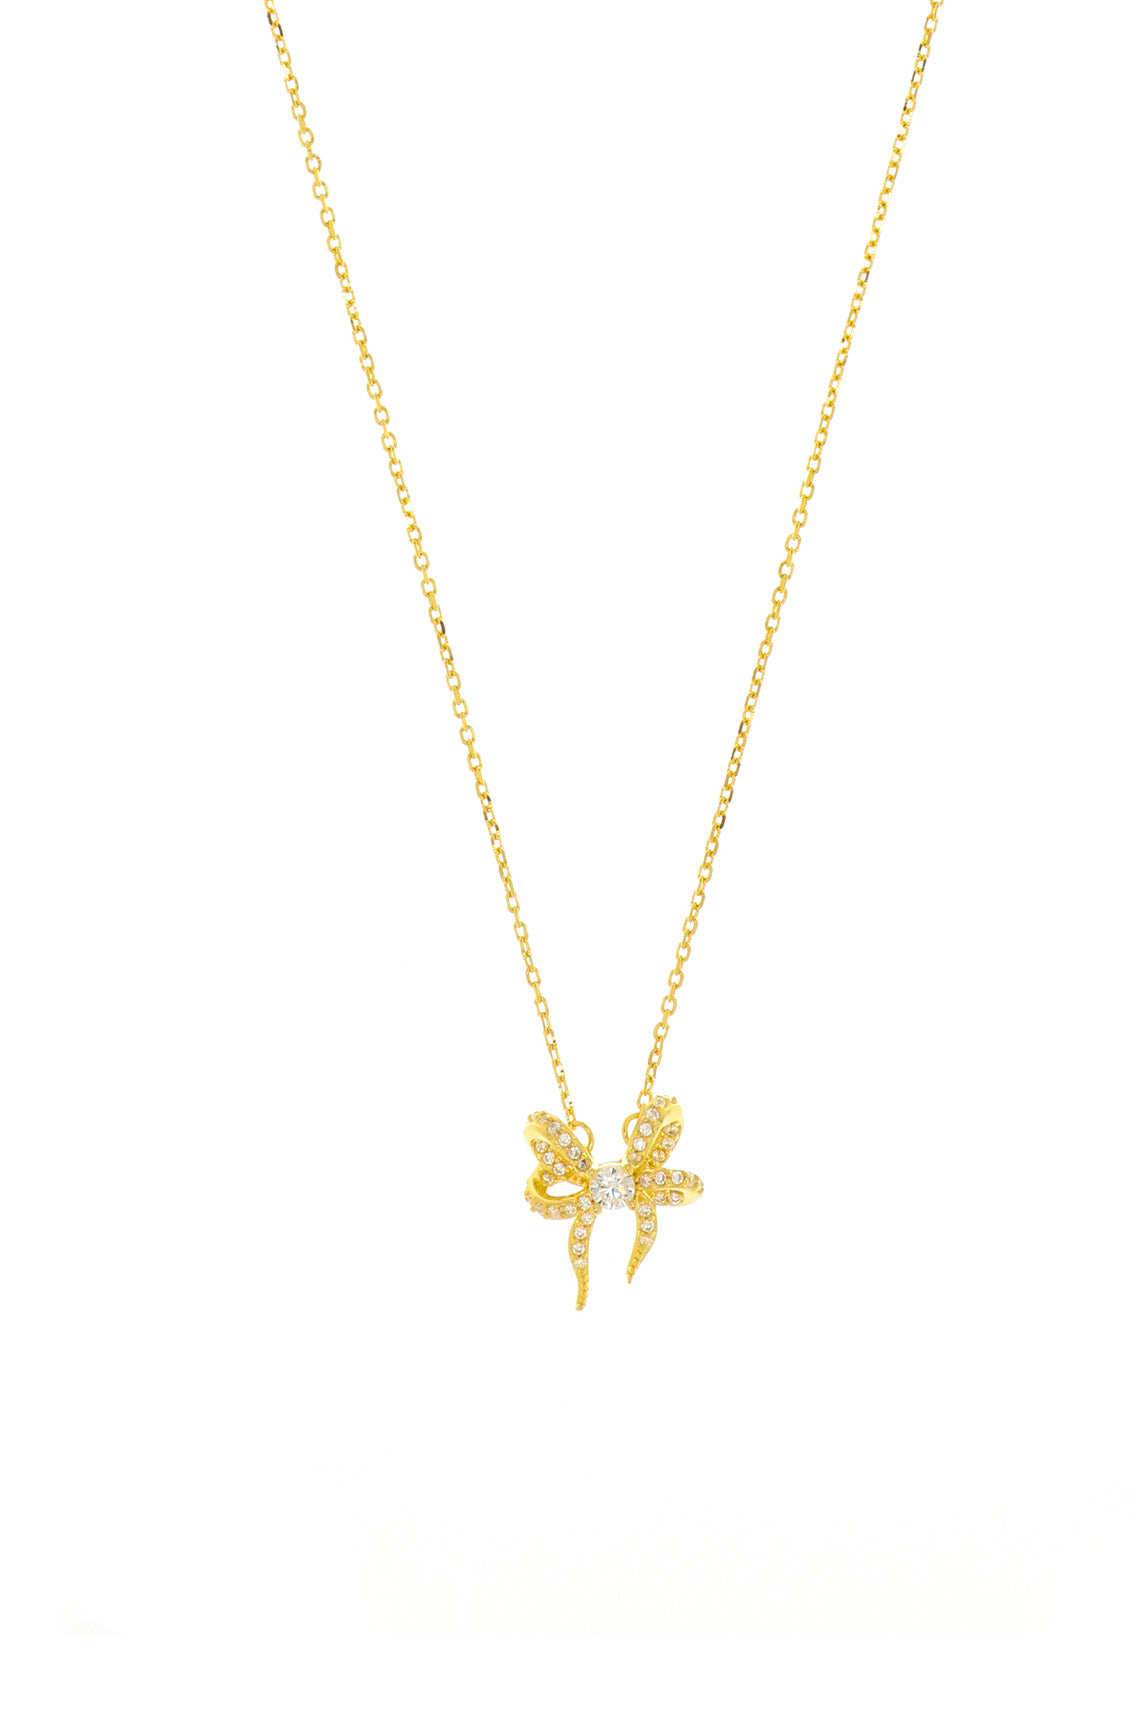 SWEETHEART BOW NECKLACE GOLD